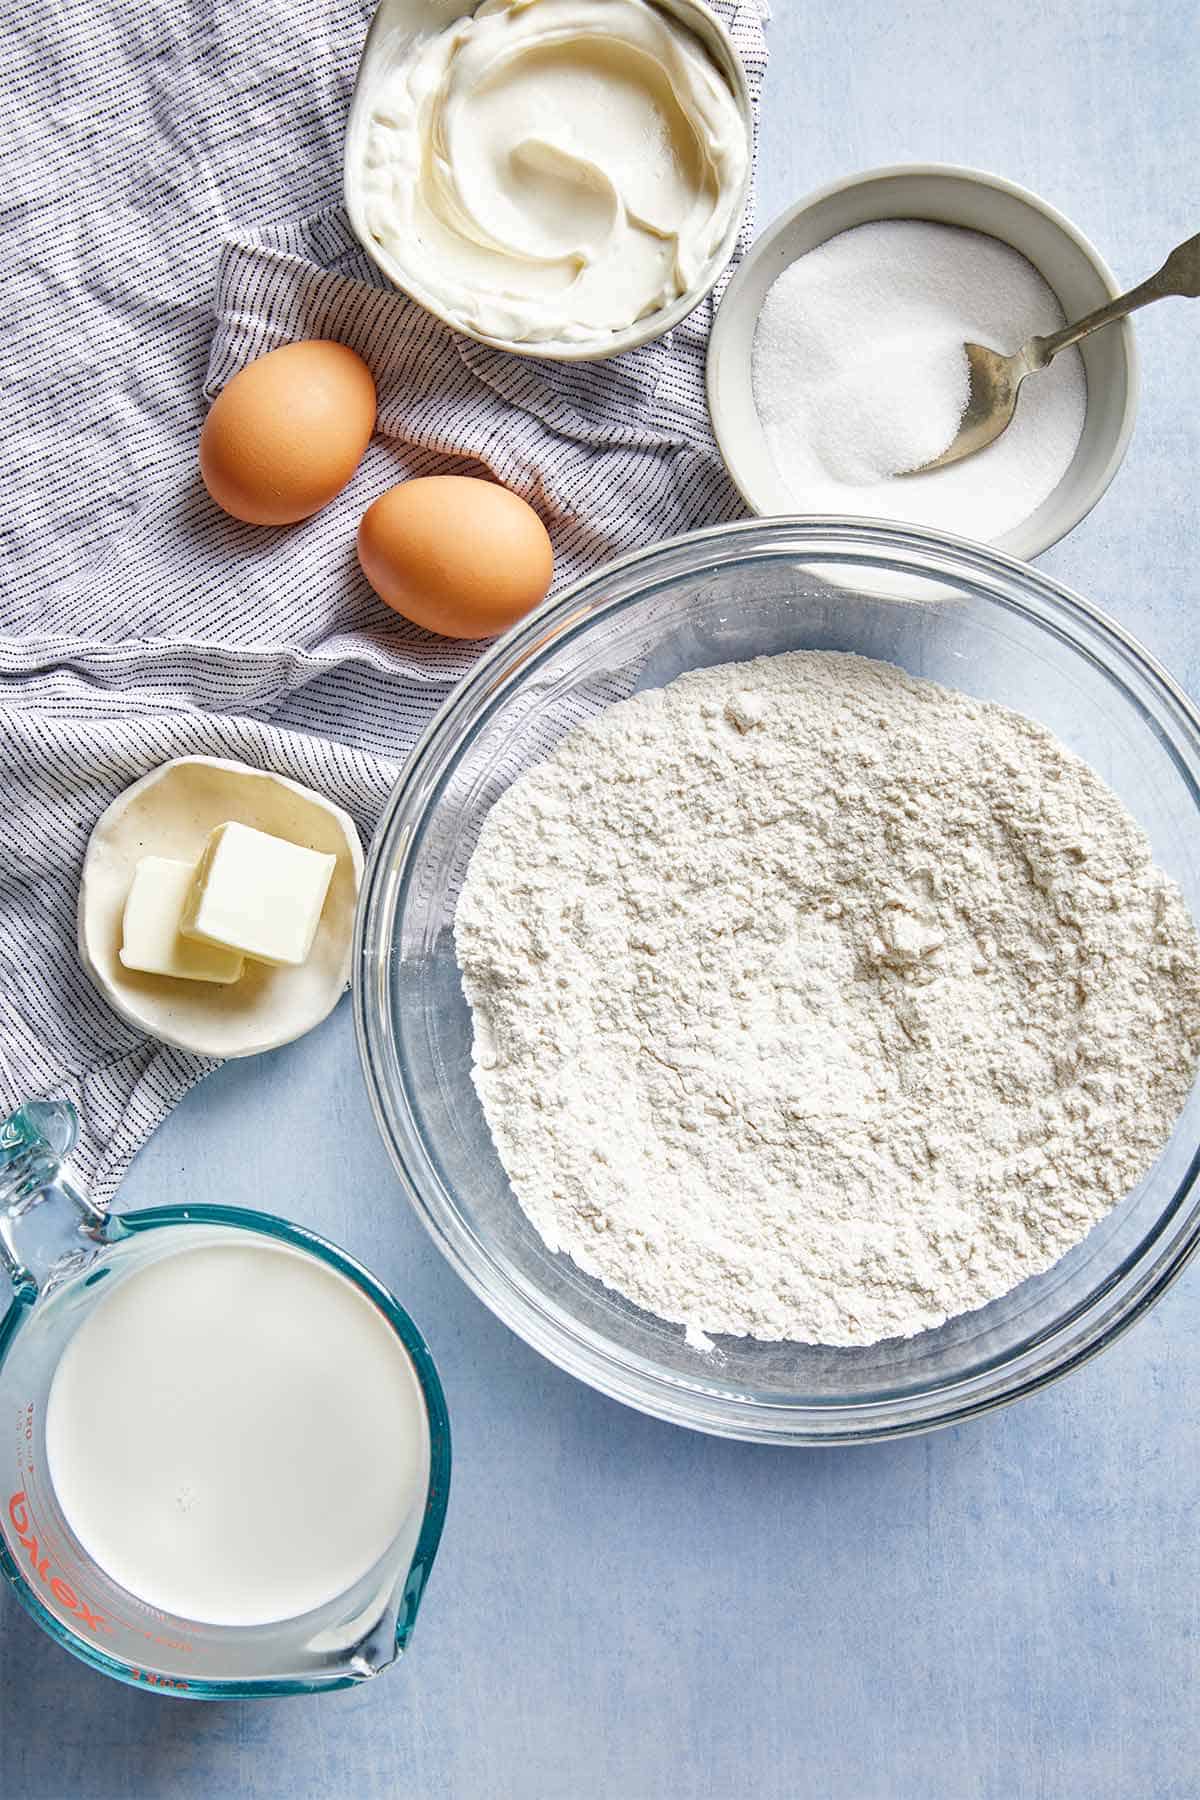 Ingredients to make classic pancakes on the table before mixing together.